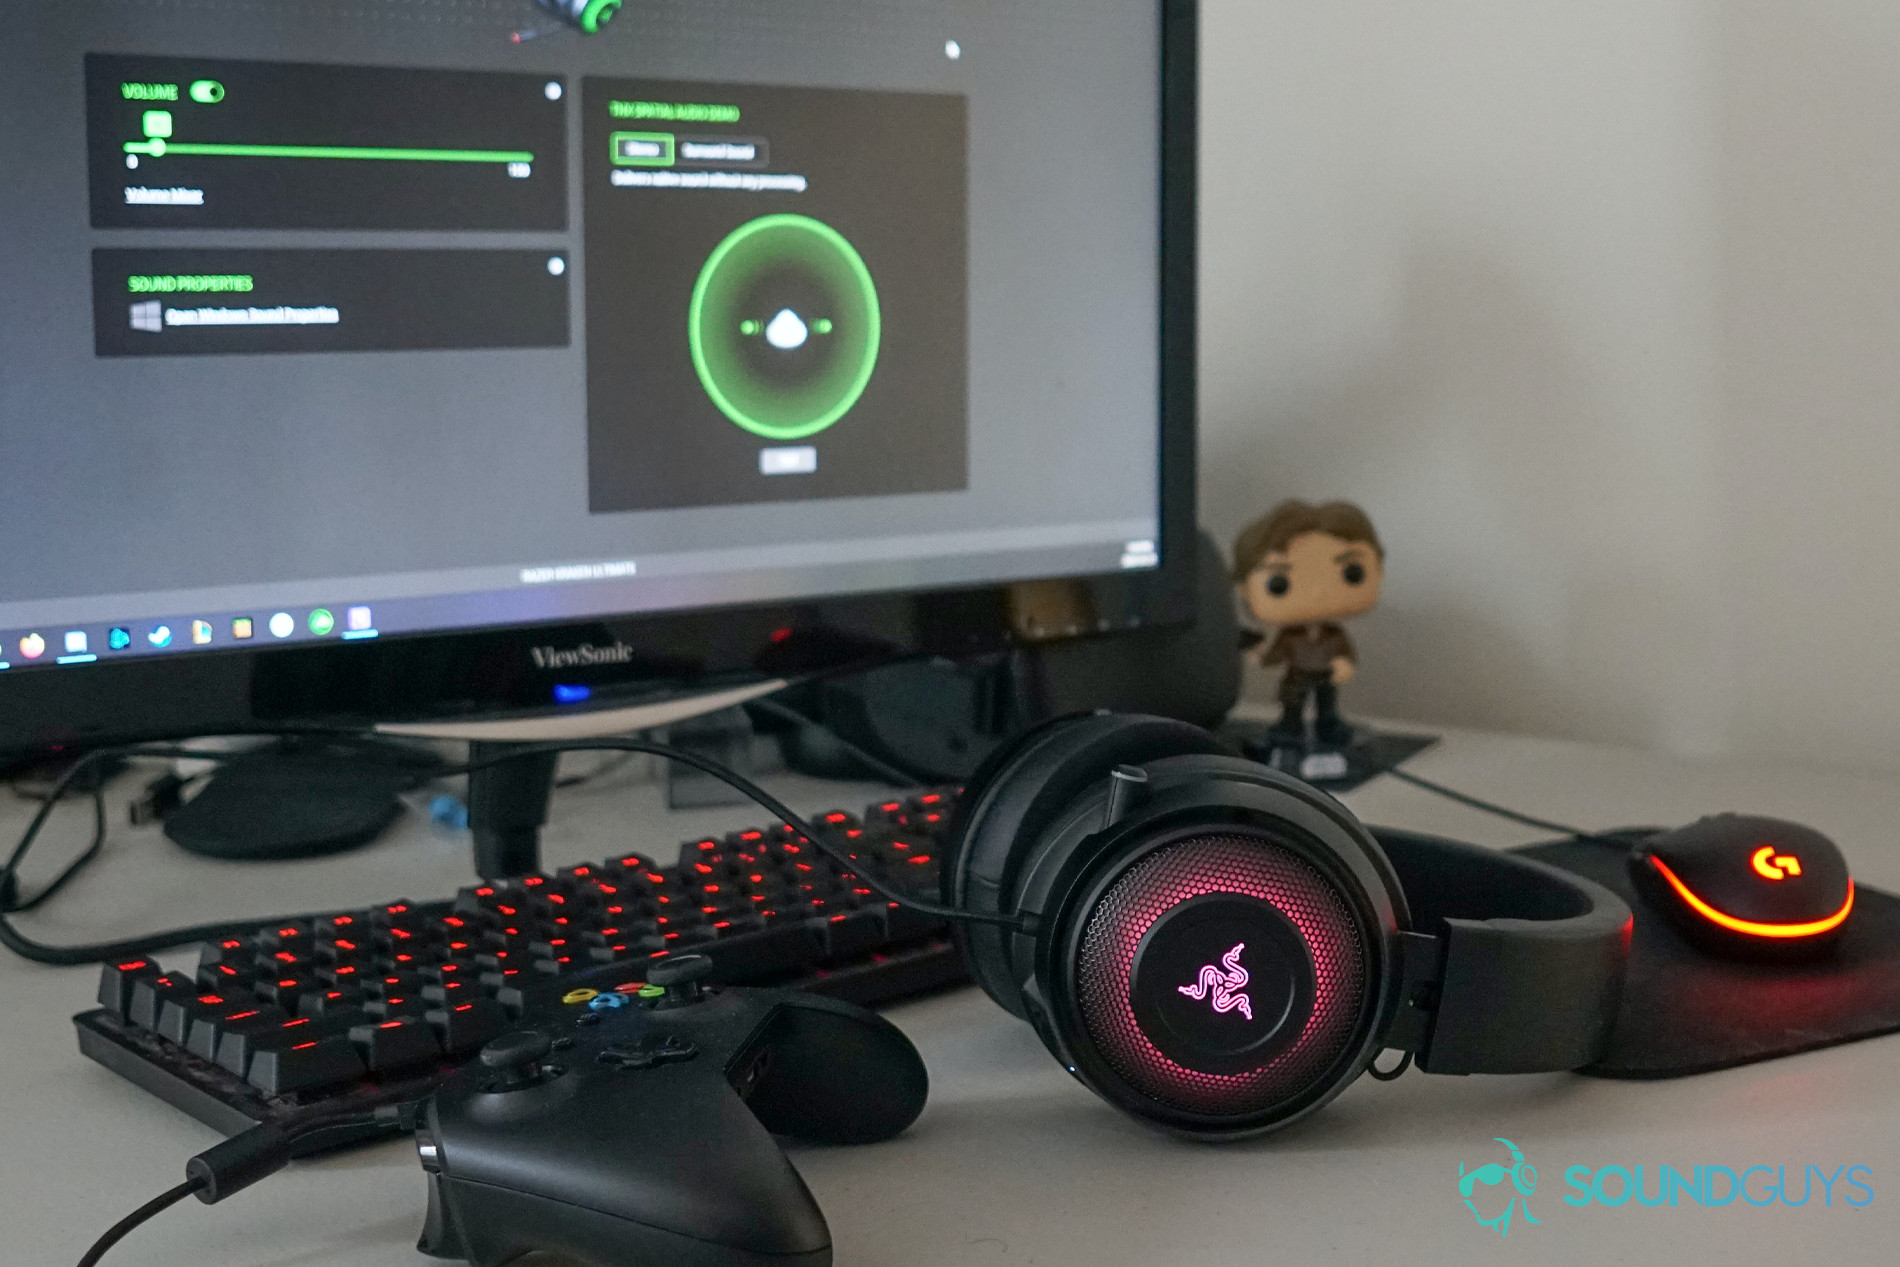 How to connect your gaming headset to any platform - SoundGuys